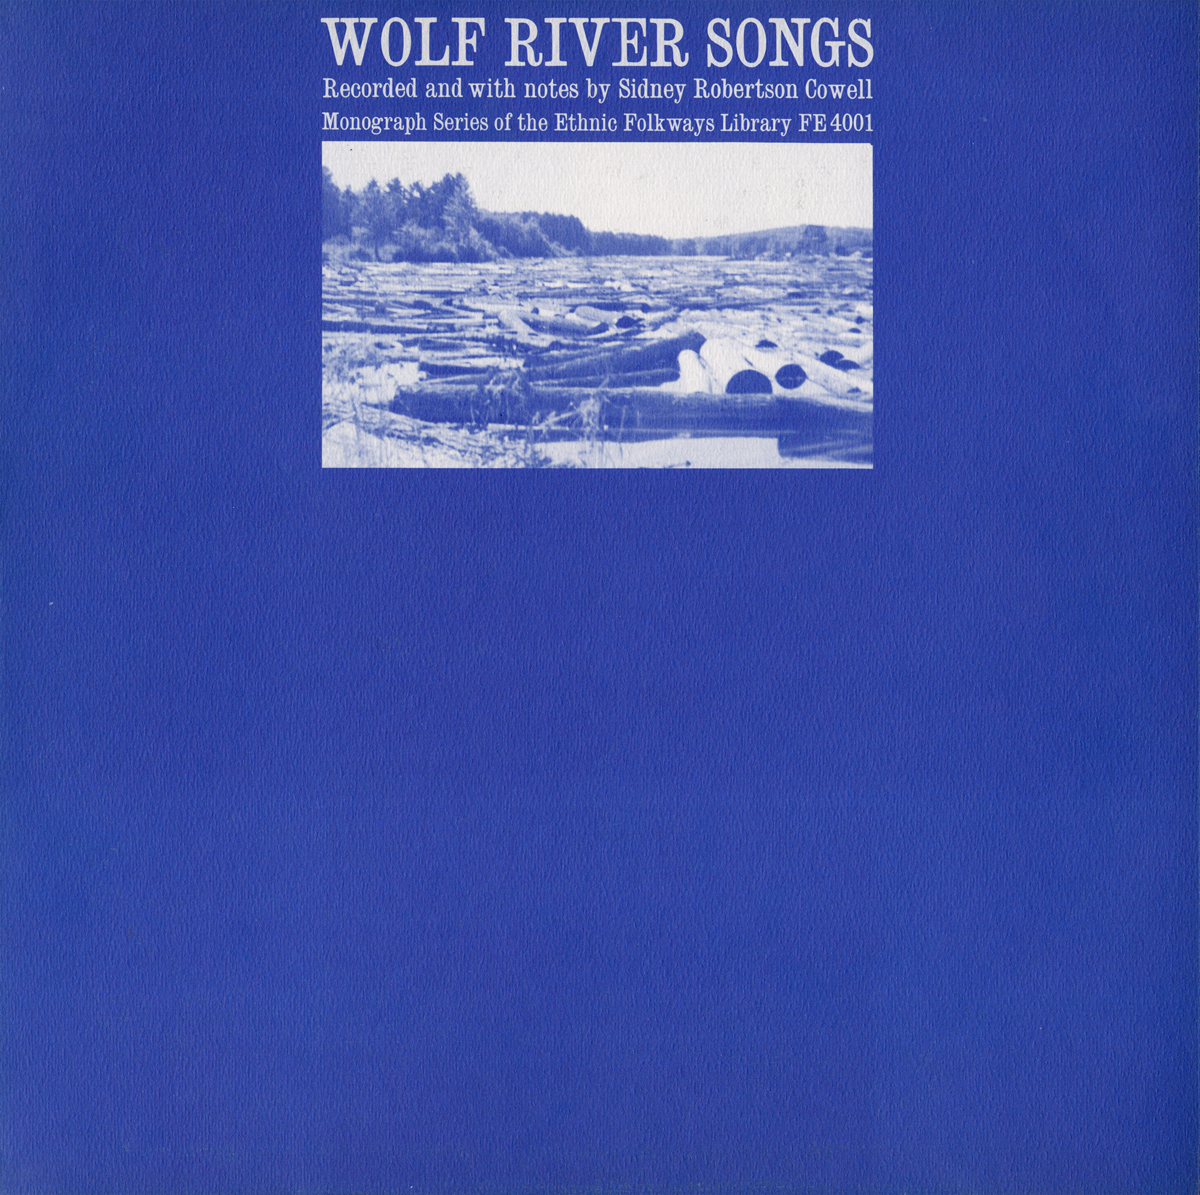 WOLF RIVER SONGS / VARIOUS